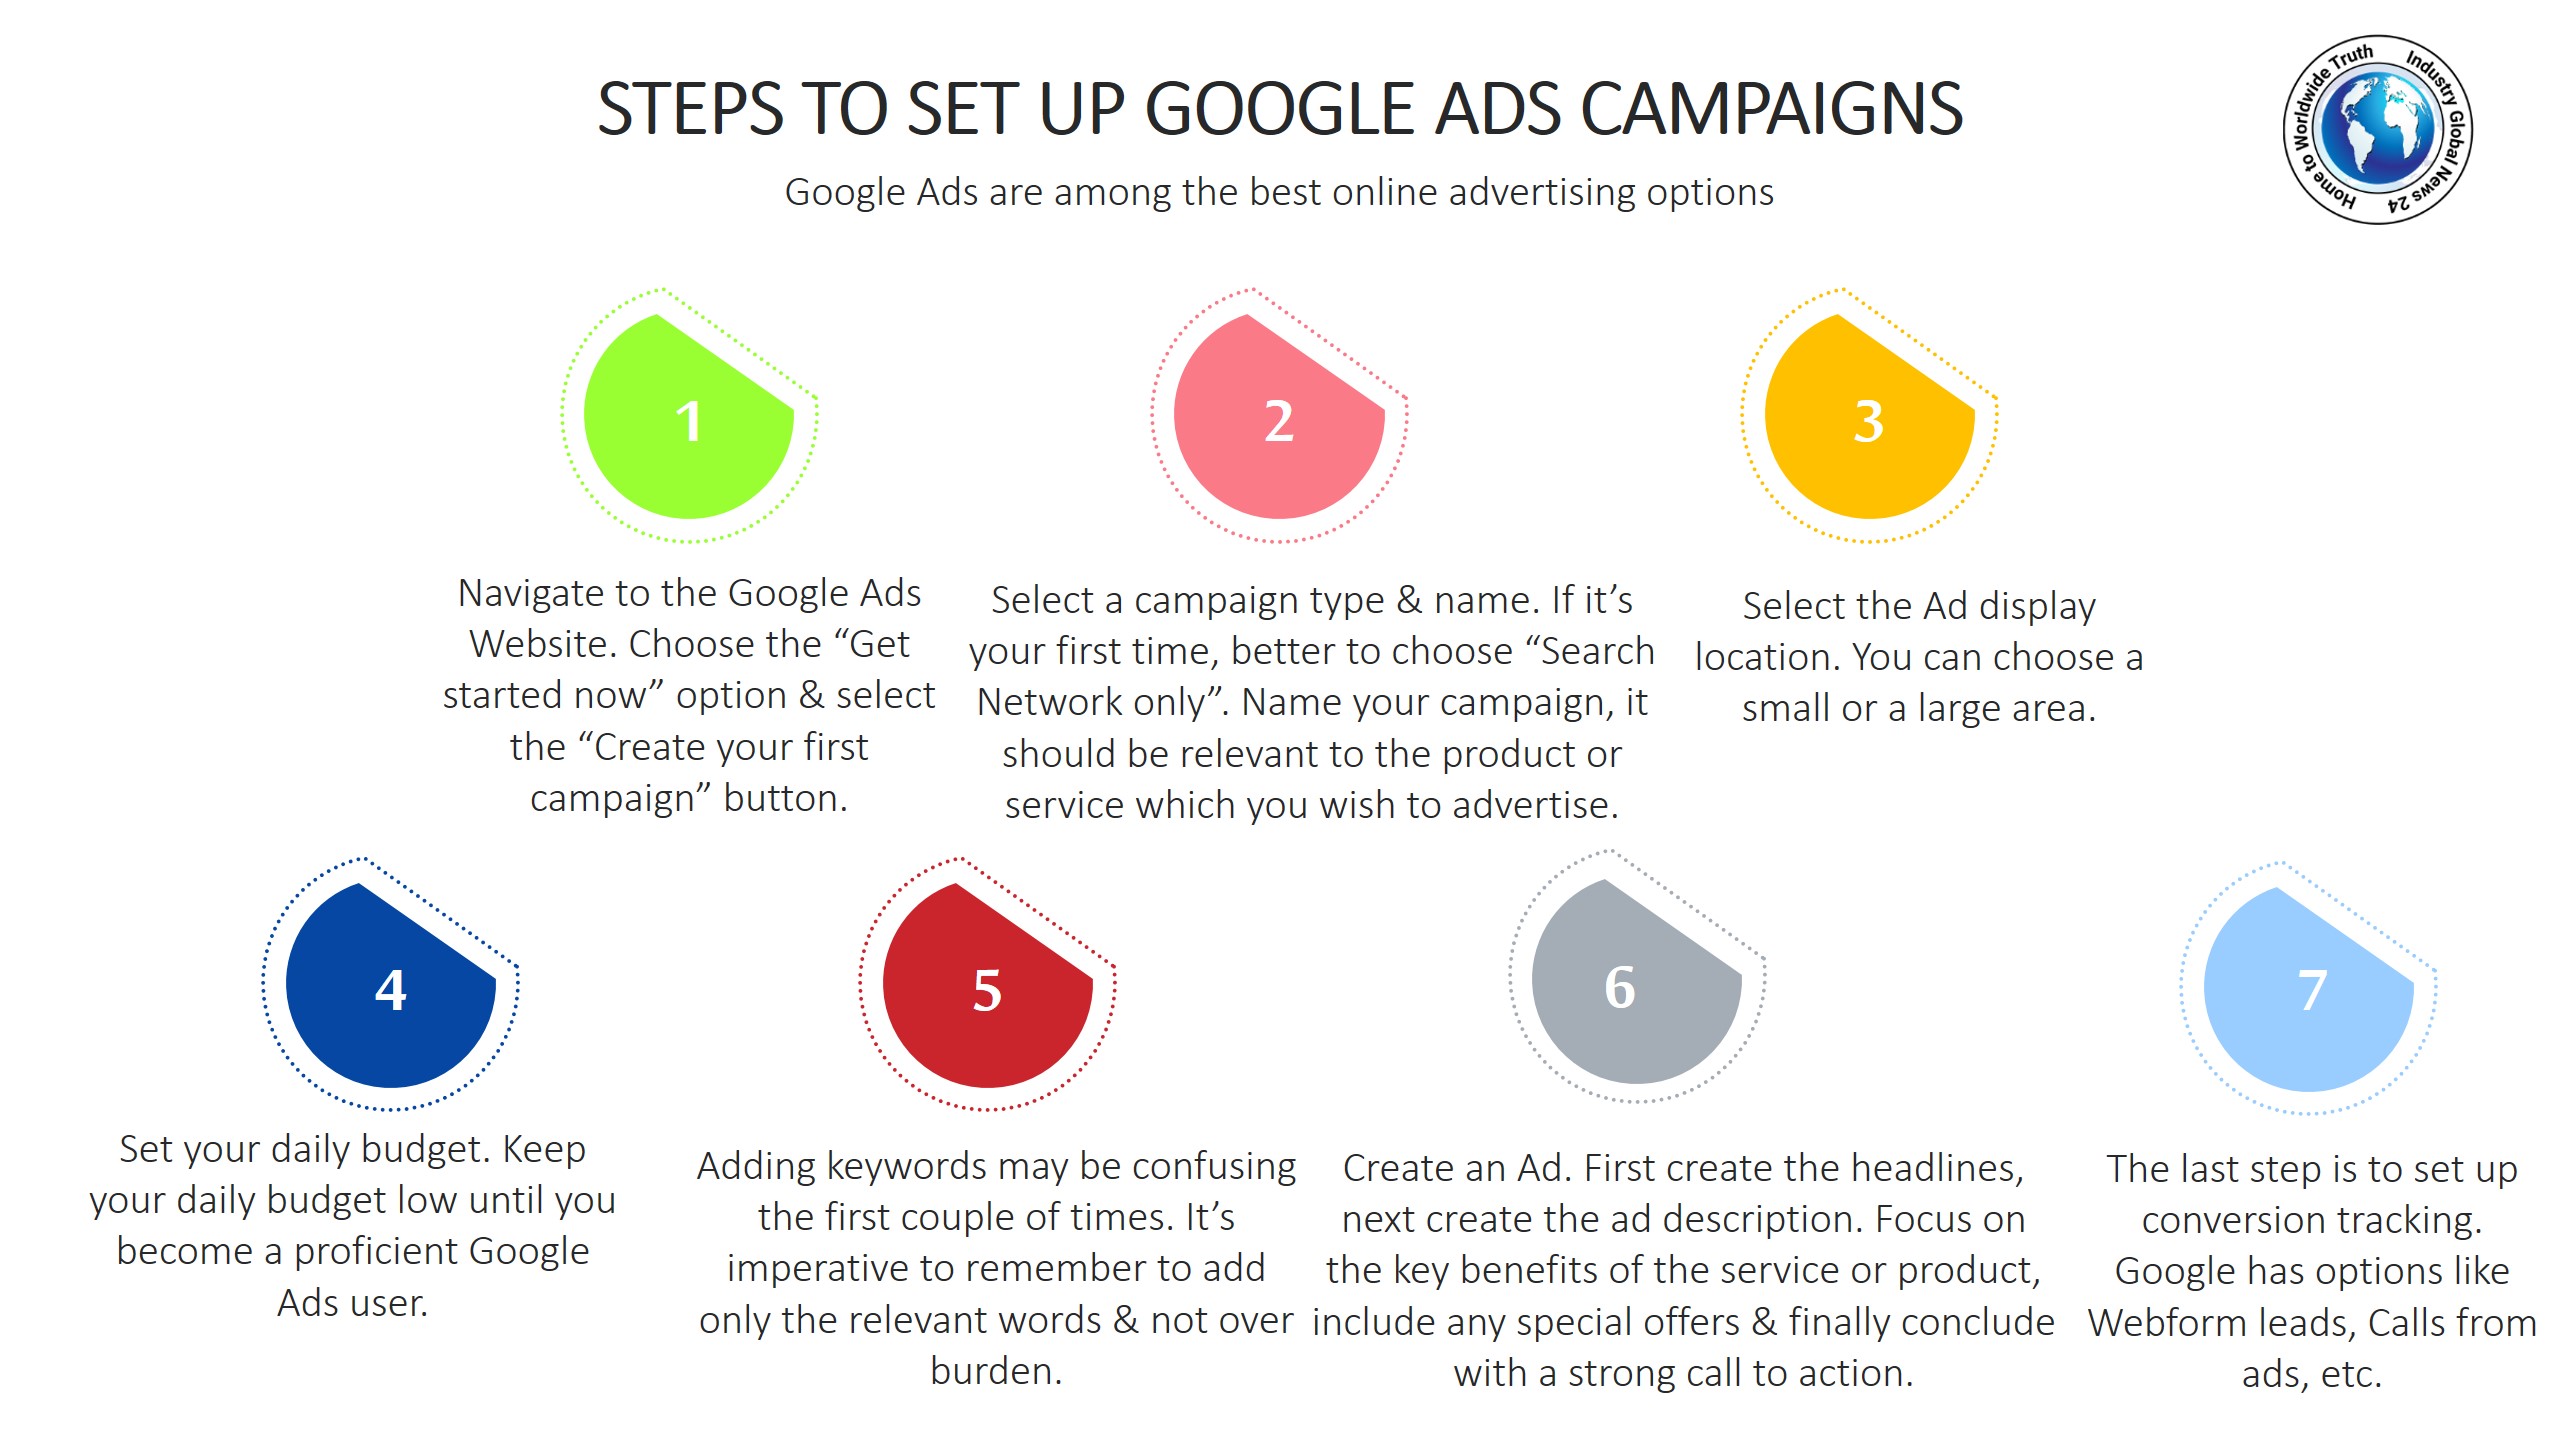 Steps to set up Google Ads campaigns